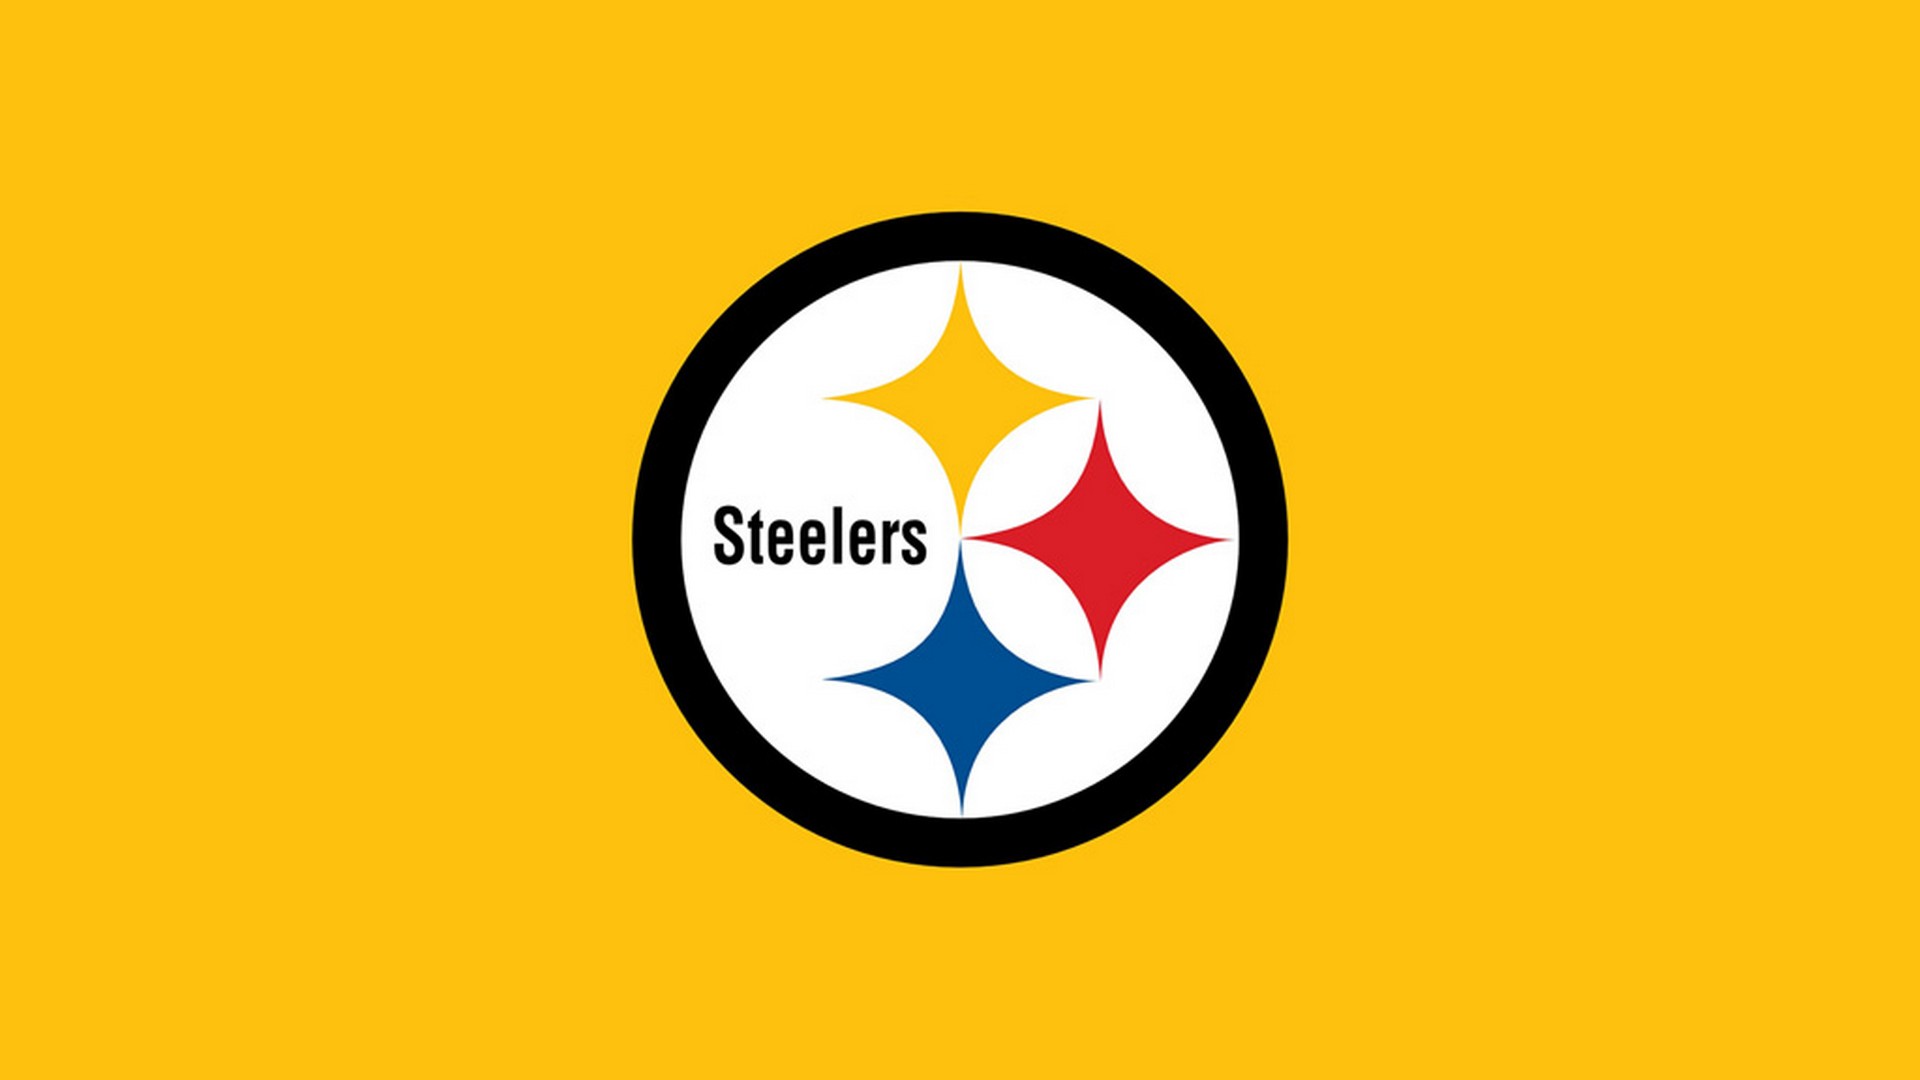 Windows Wallpaper Steelers Logo with resolution 1920x1080 pixel. You can make this wallpaper for your Mac or Windows Desktop Background, iPhone, Android or Tablet and another Smartphone device